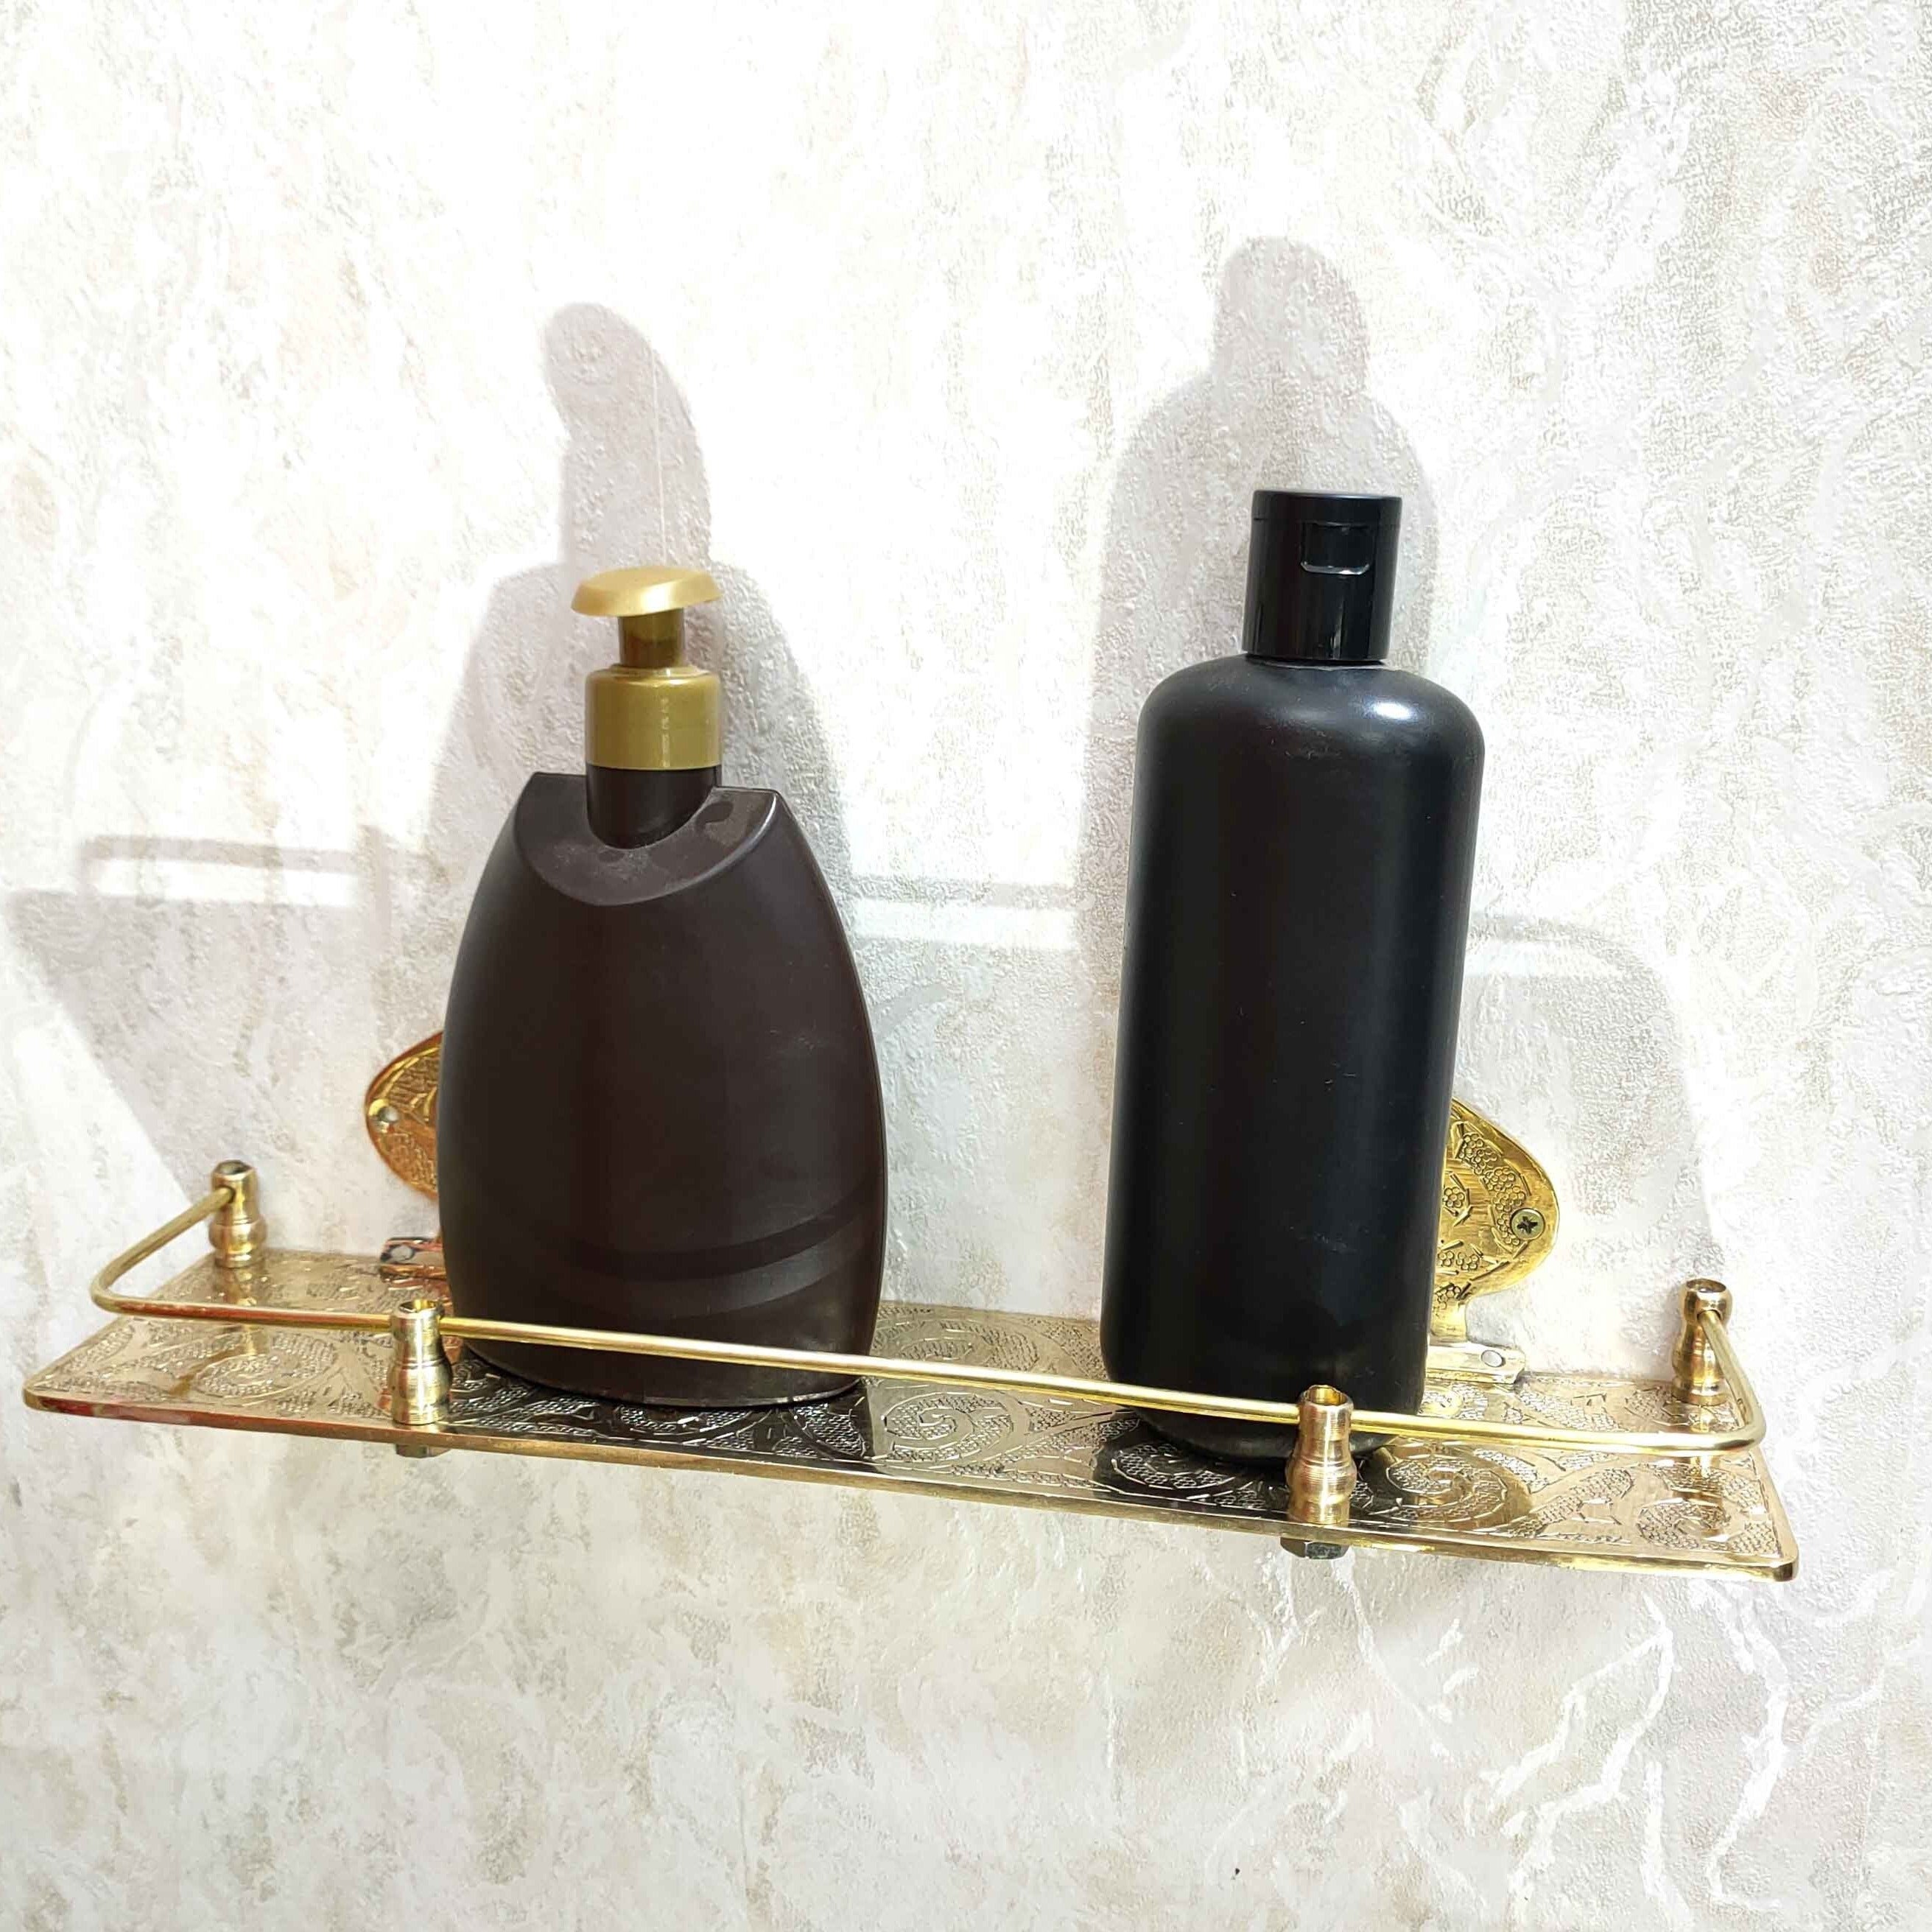 Magical Bathroom Storage Solution with Artistic Whimsy